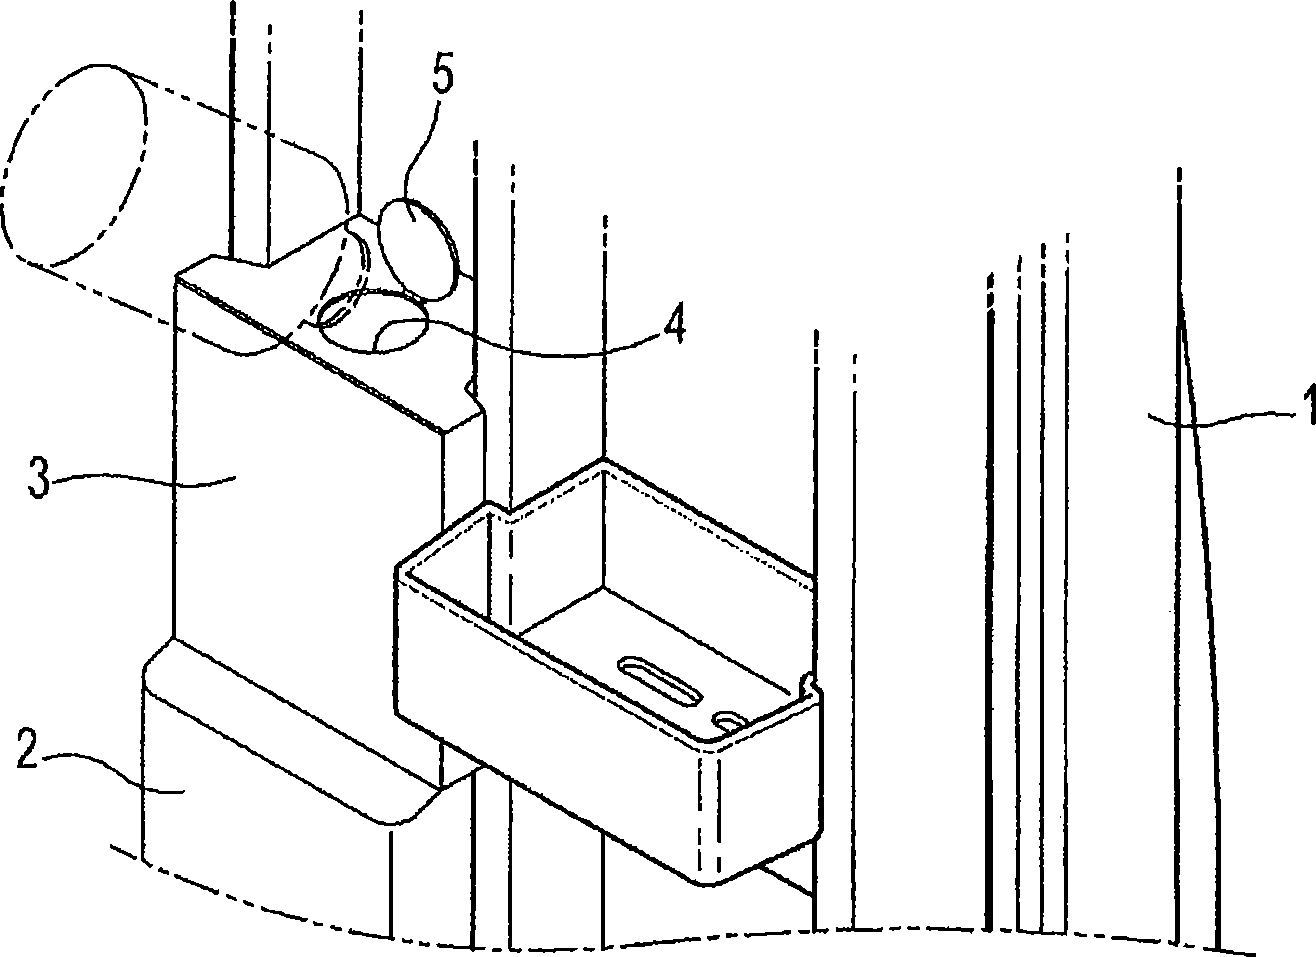 Water tank for dispenser and refrigerator having the same